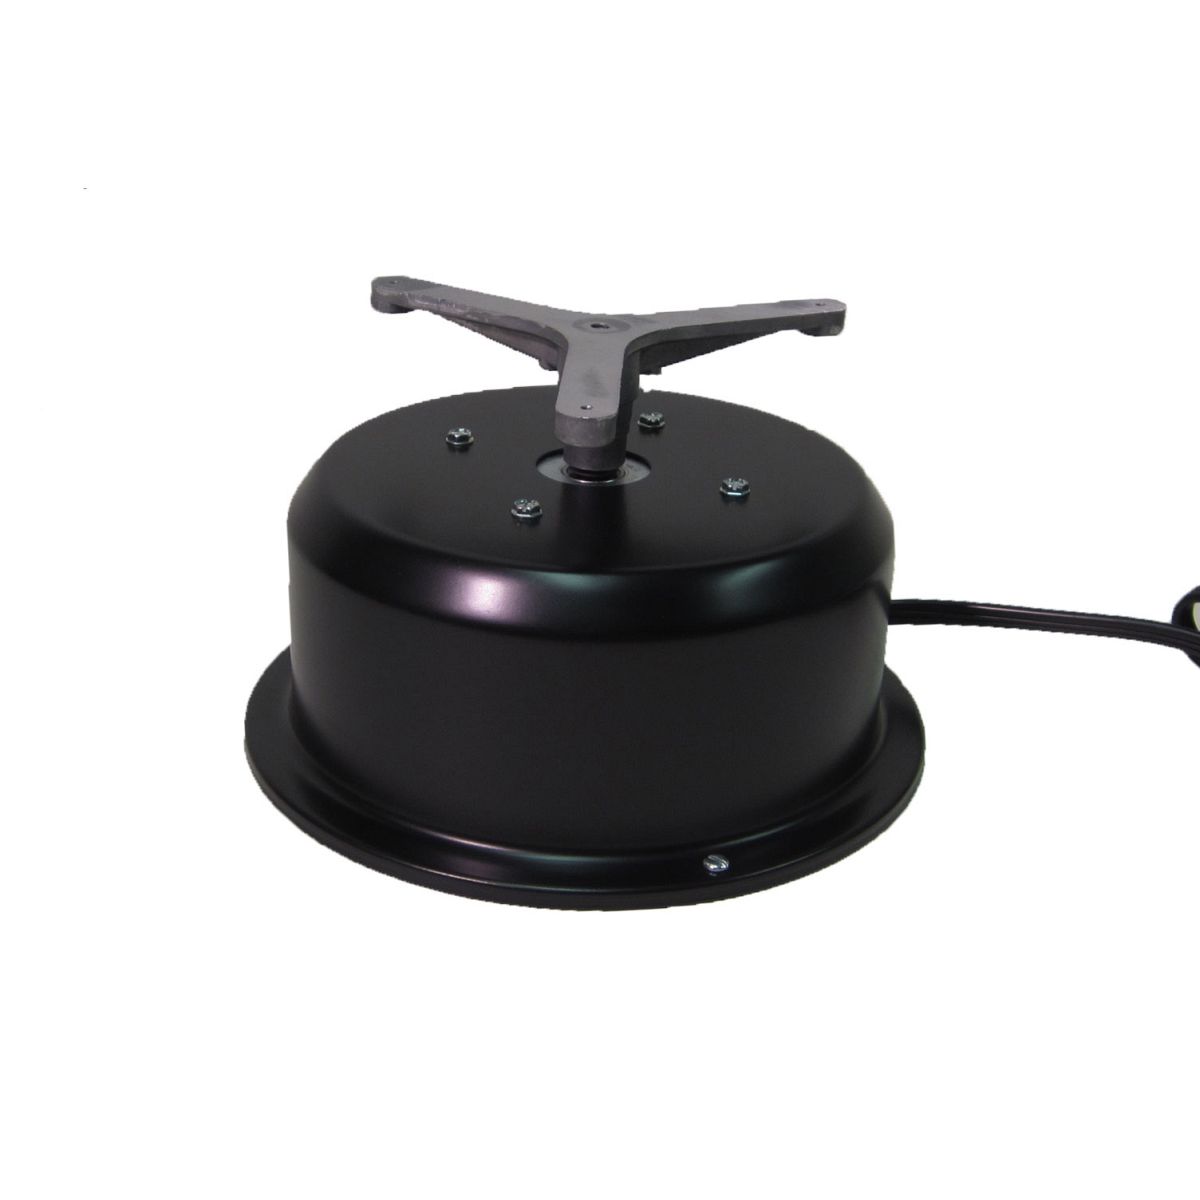 Motorized Display Turntable for Trades Shows, Retail, Photography, and More  - 50 lbs Capacity